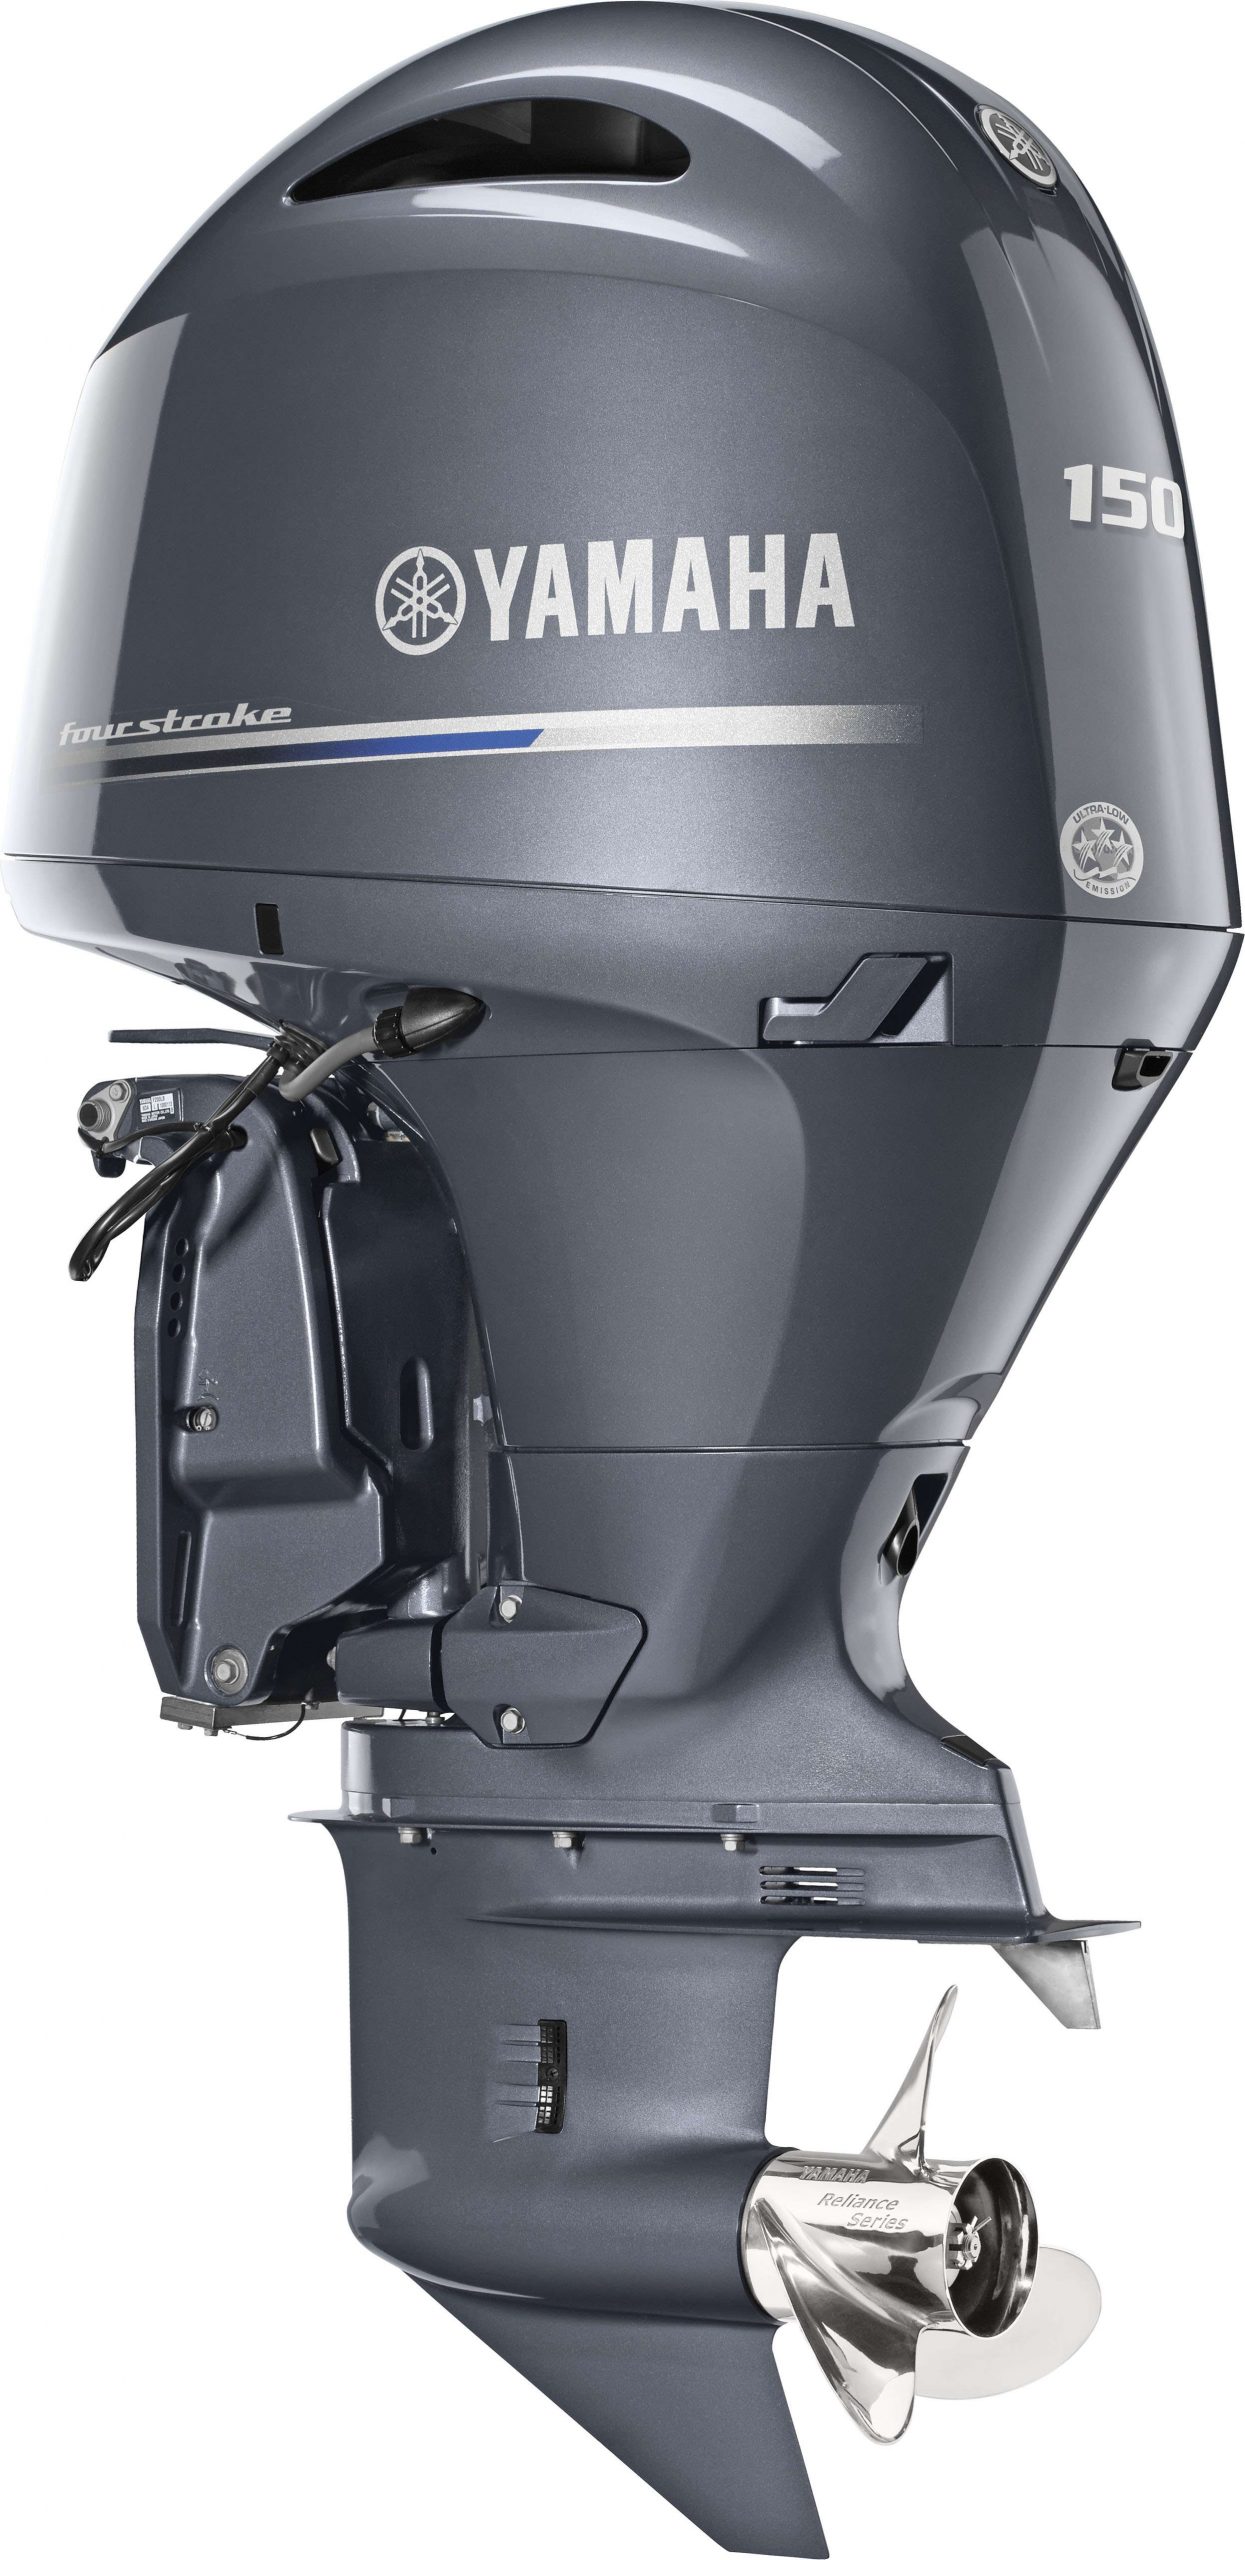 <B>YAMAHA F150B</b>
With technological updates to the original F150, this outboard features a new eight-tooth dog clutch that replaces the six-tooth clutch for smoother shifting. It also has internal machining and metallurgical improvements. The F150B offers better reliability and quieter operation, and it has an improved appearance thanks to lighter composite upper and lower cowlings that provide a sleeker profile.